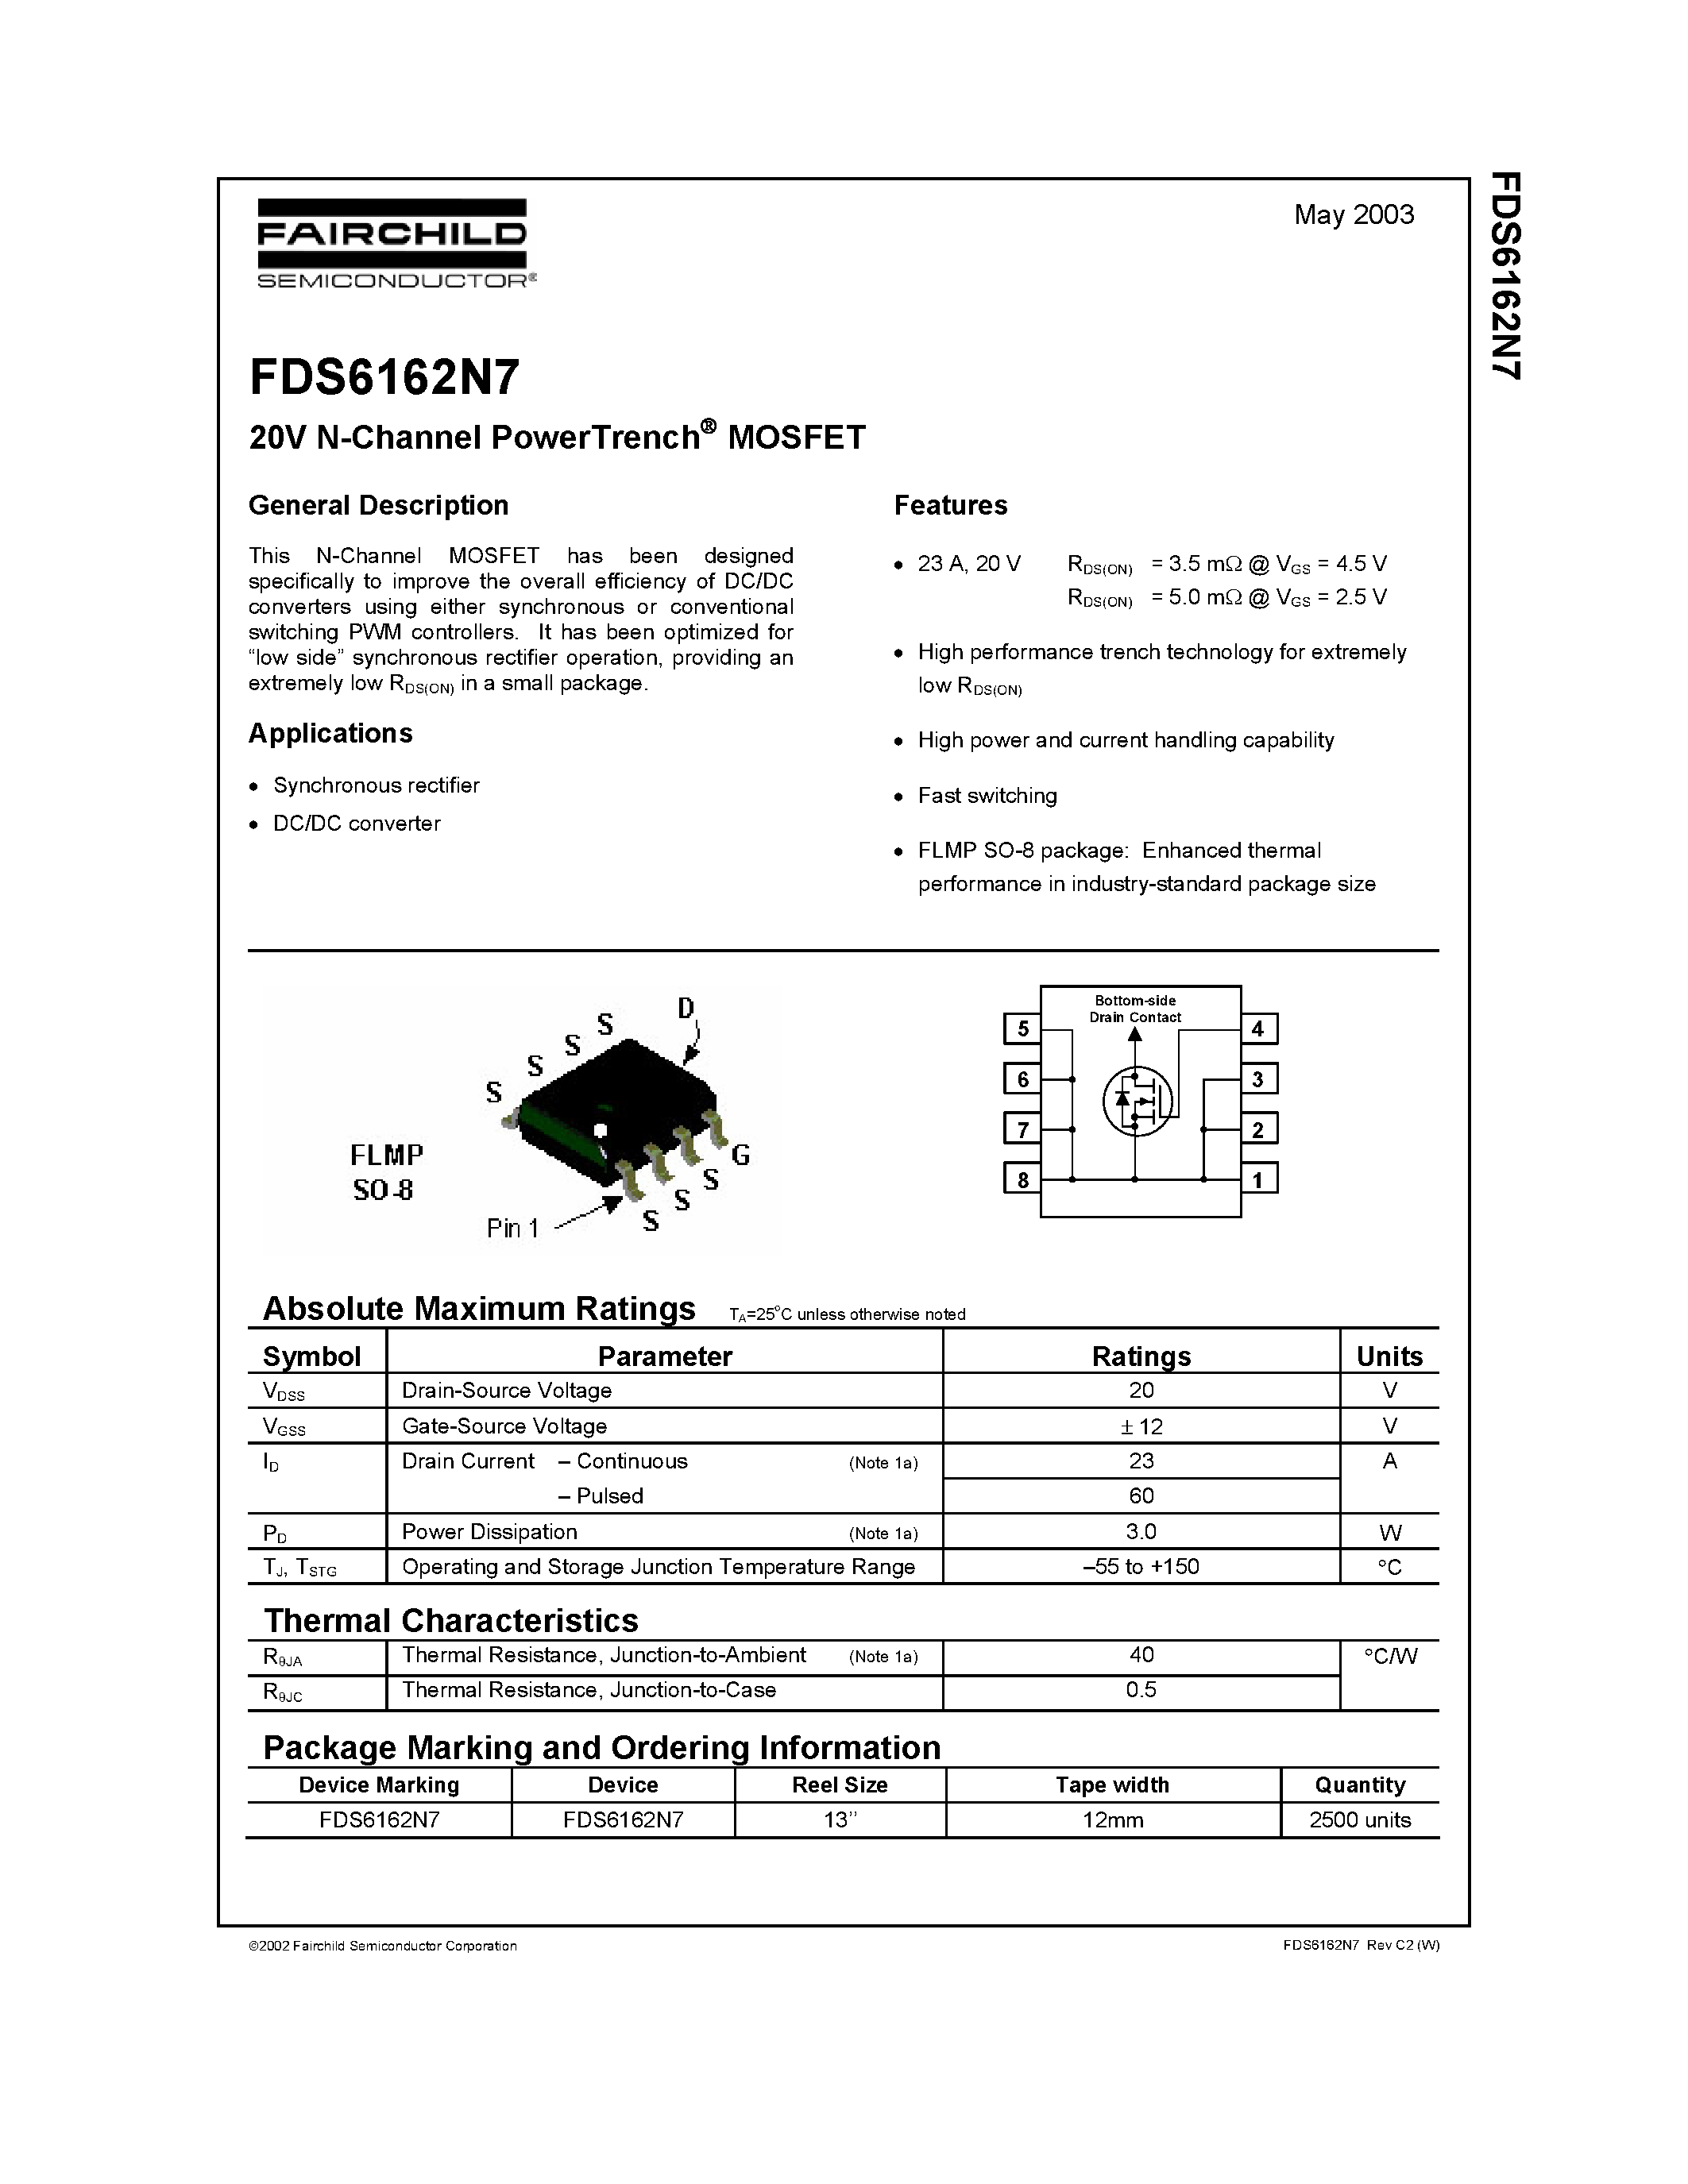 Даташит FDS6162N7 - 20V N-Channel PowerTrench MOSFET страница 1